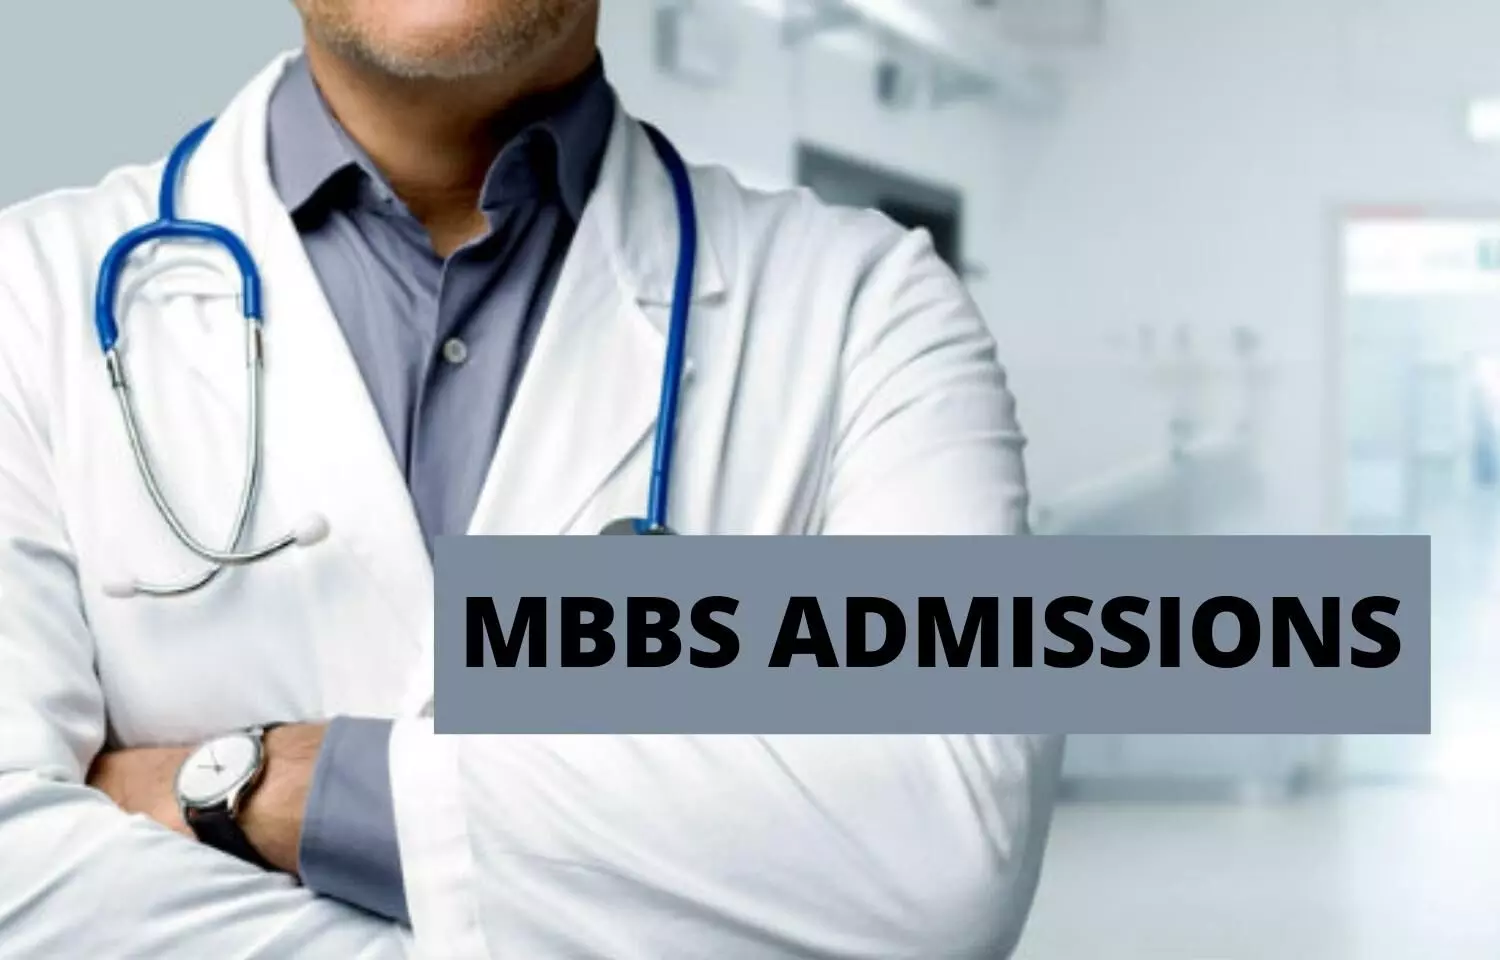 MBBS 2021 at AIIMS Kalyani: 125 seats up for grabs, Check out eligibility criteria, fees, CRRI, all admission details here